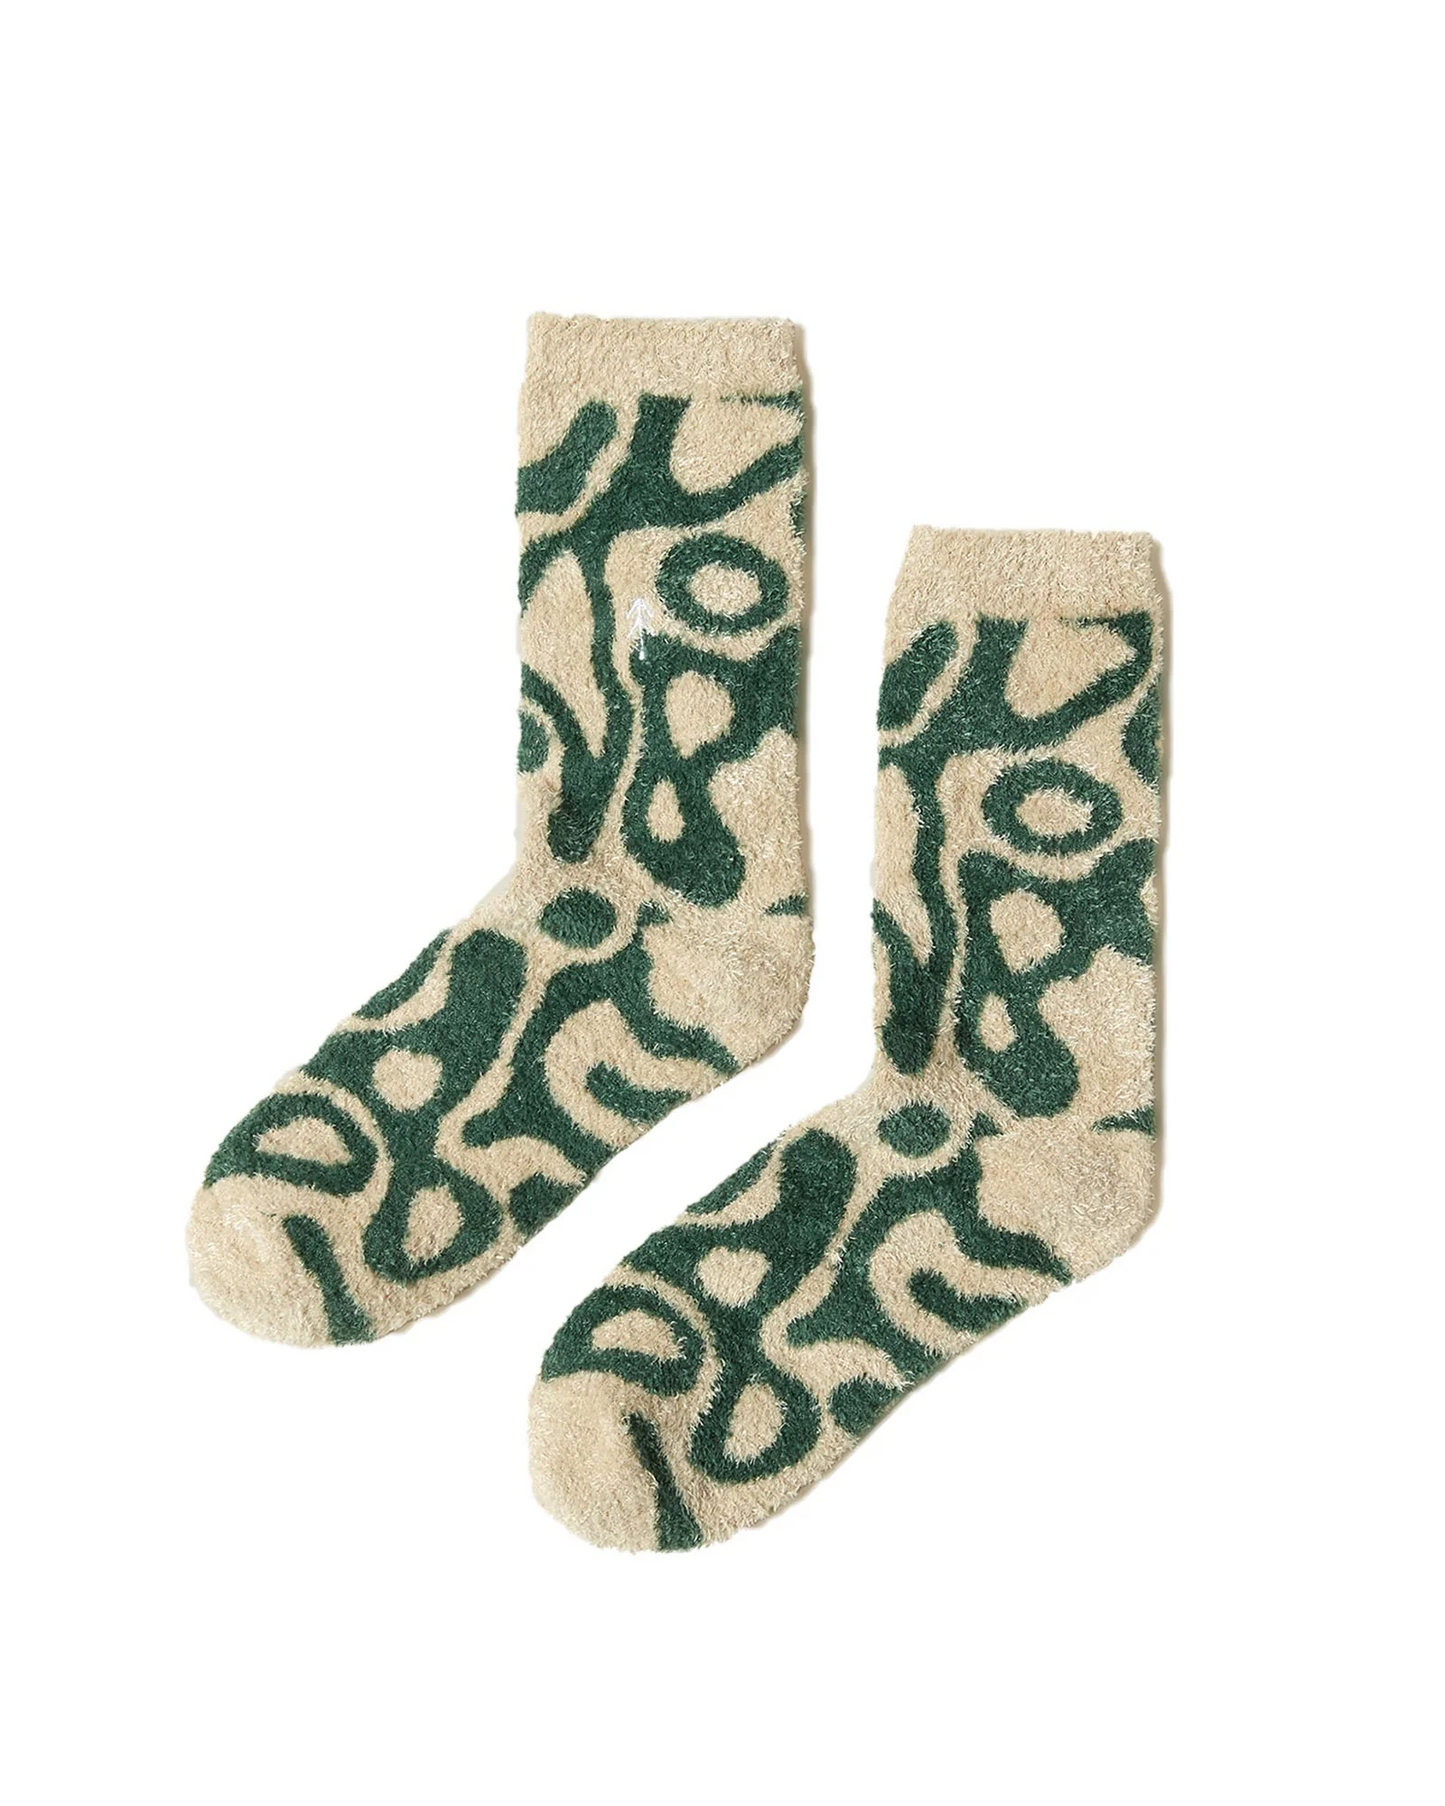 Parks Project Yellowstone Geysers Cozy Socks